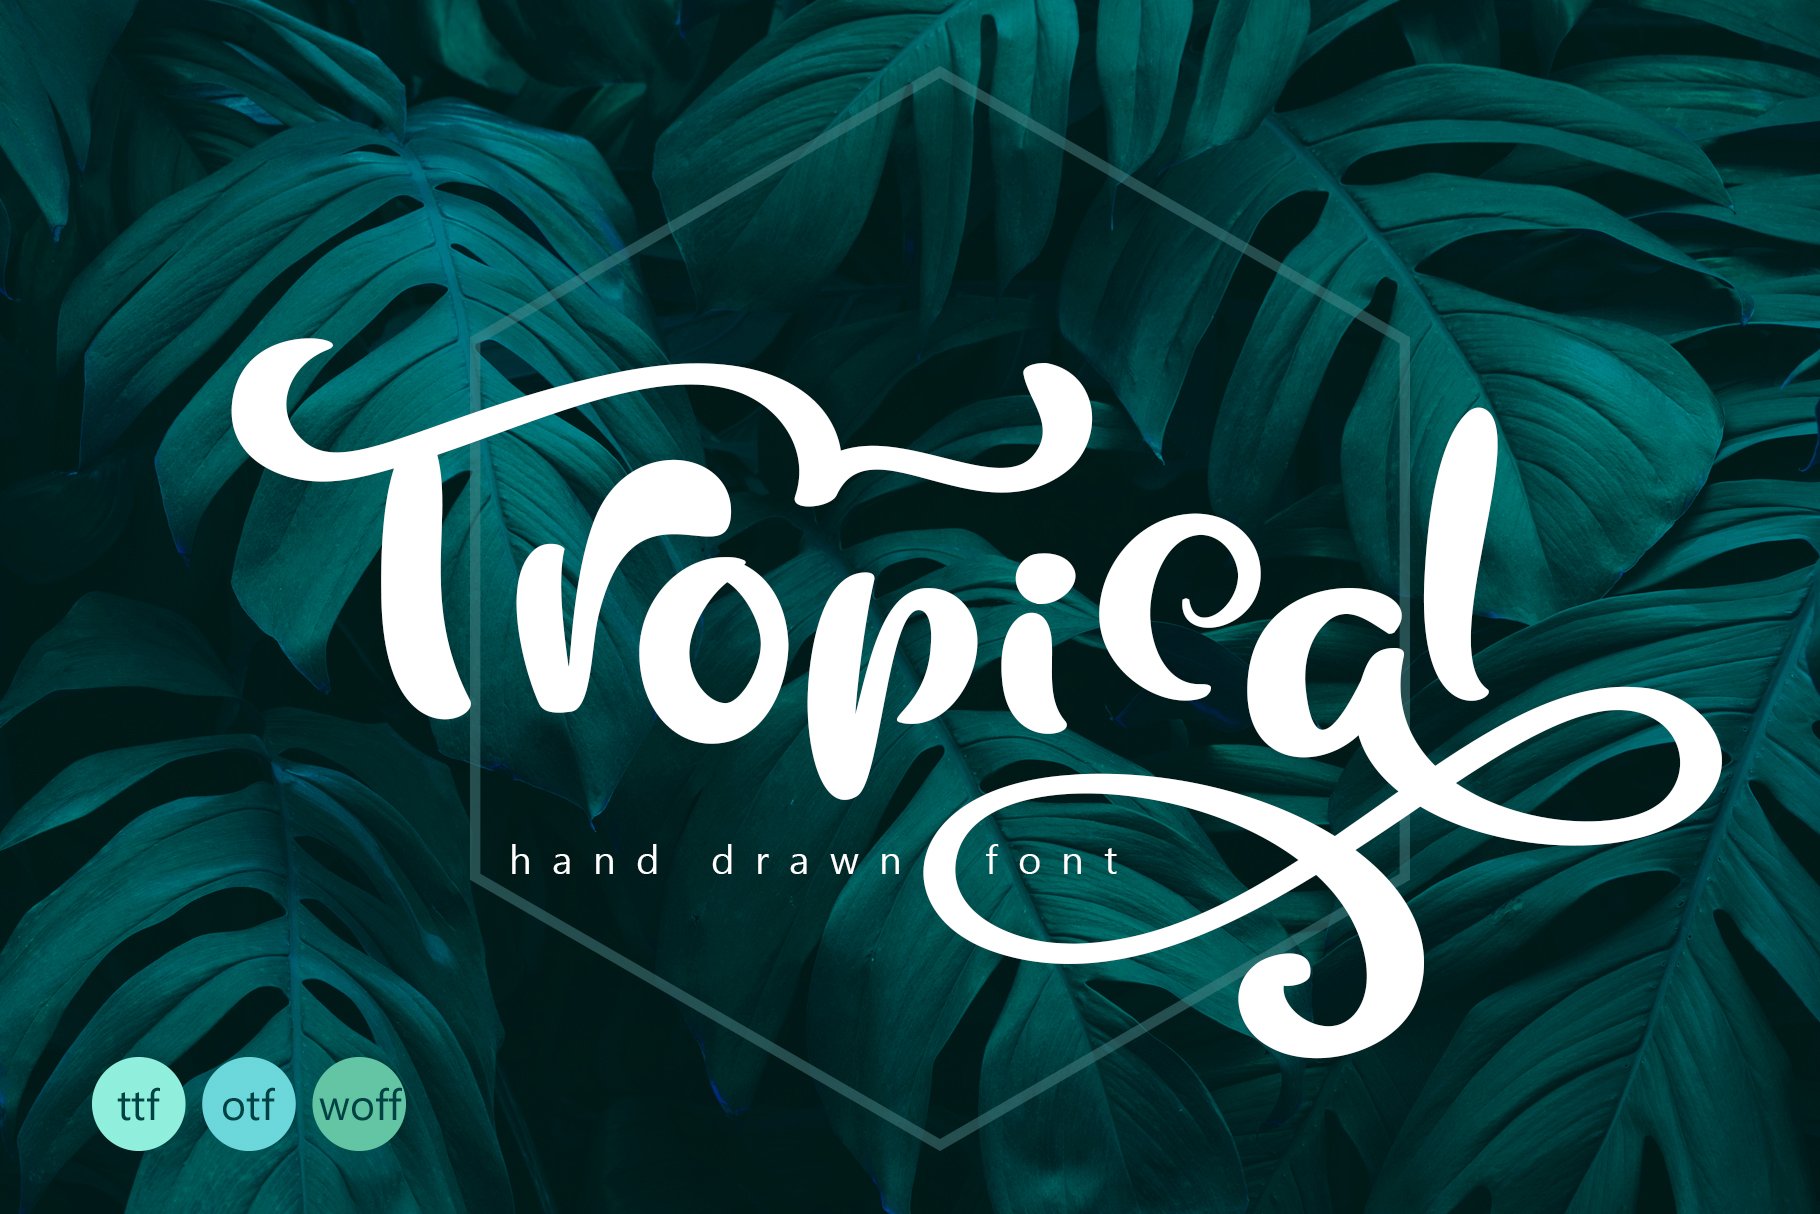 Tropical Summer Font cover image.